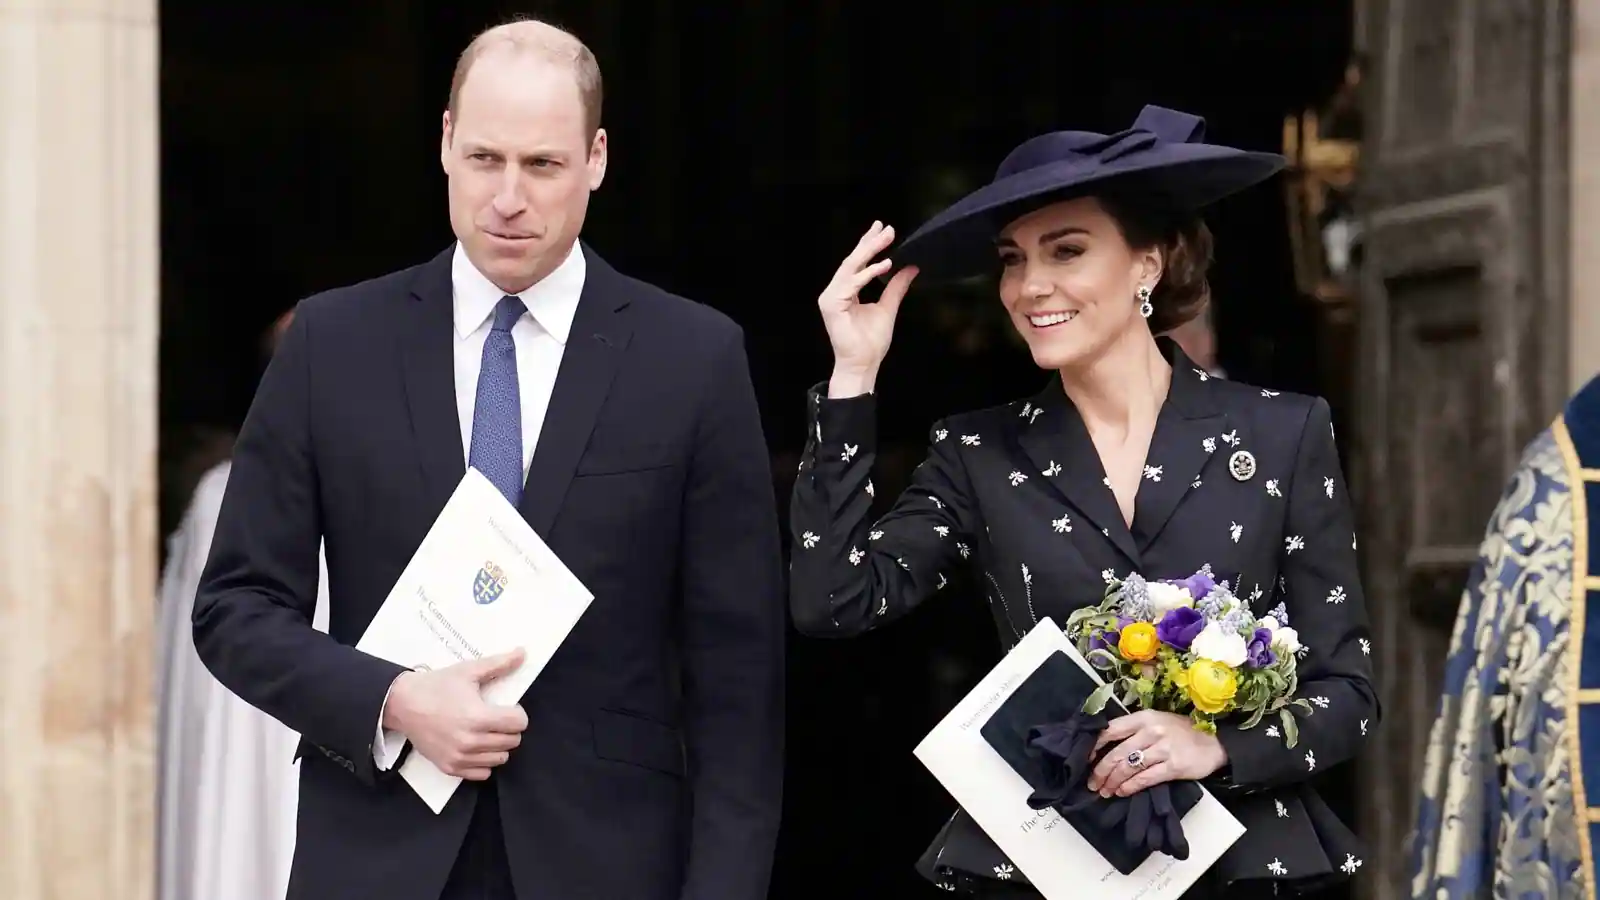 Kate Middleton Keen to Attend This Royal Event Despite Prince William’s Resistance